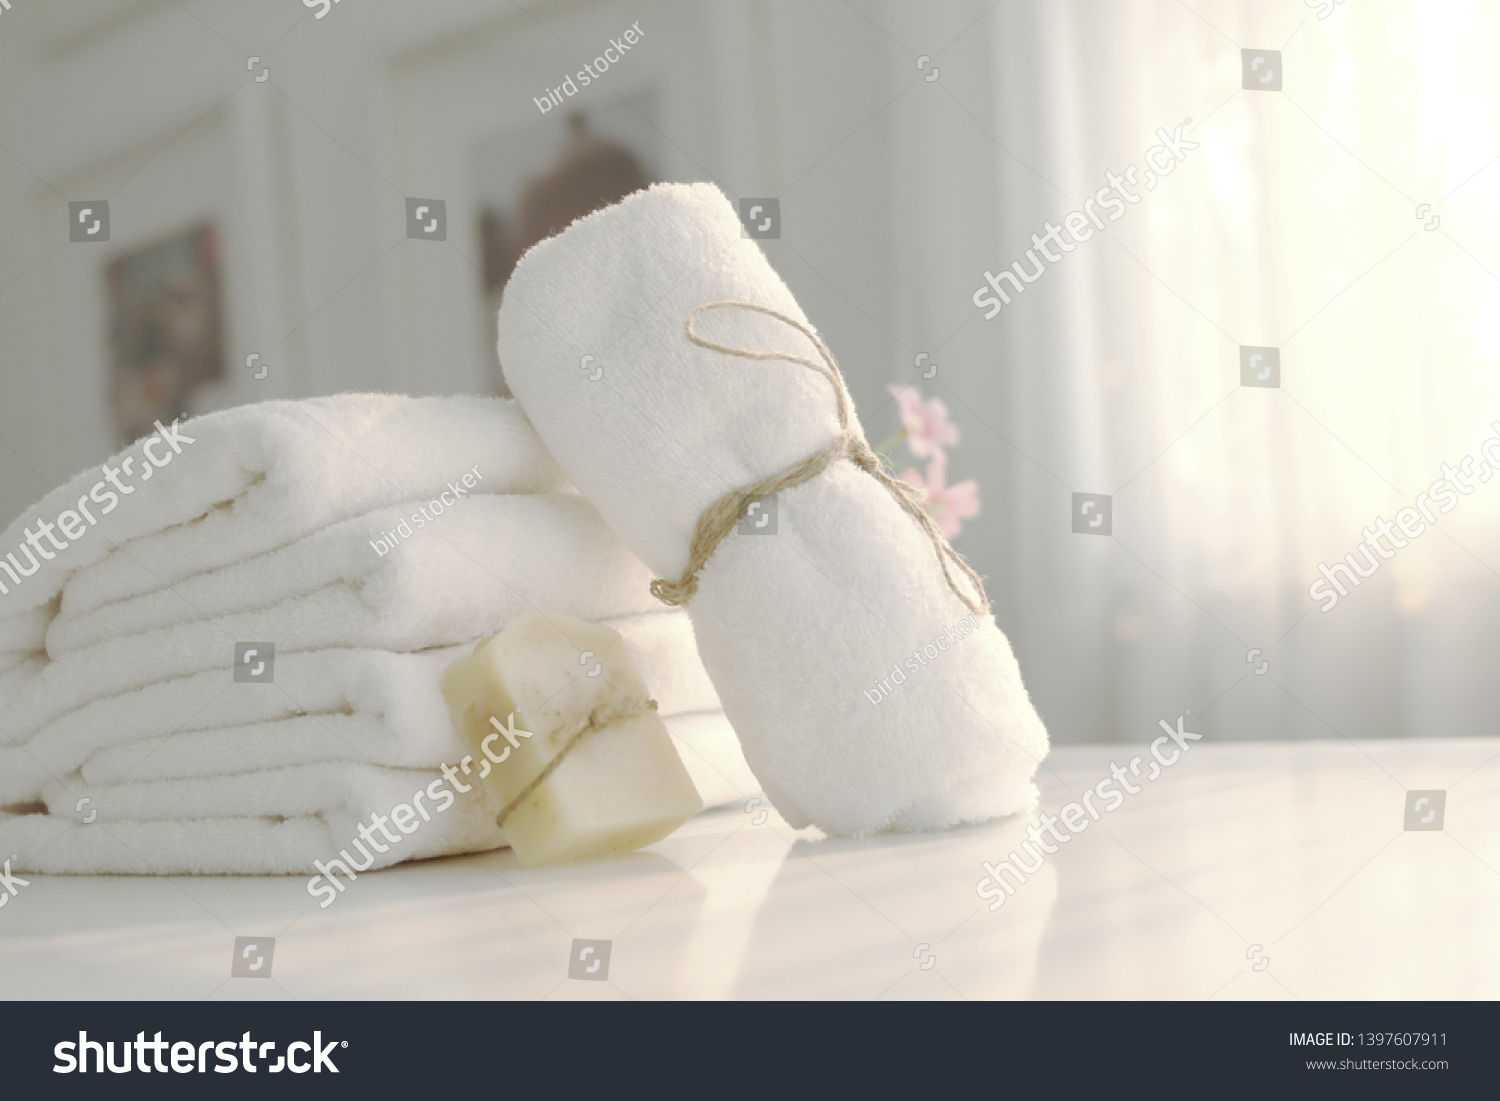 stock-photo-beautifully-folded-white-towels-and-toiletries-luxury-bedroom-in-the-bedroom-bed-hotel-bedroom-1397607911.jpg